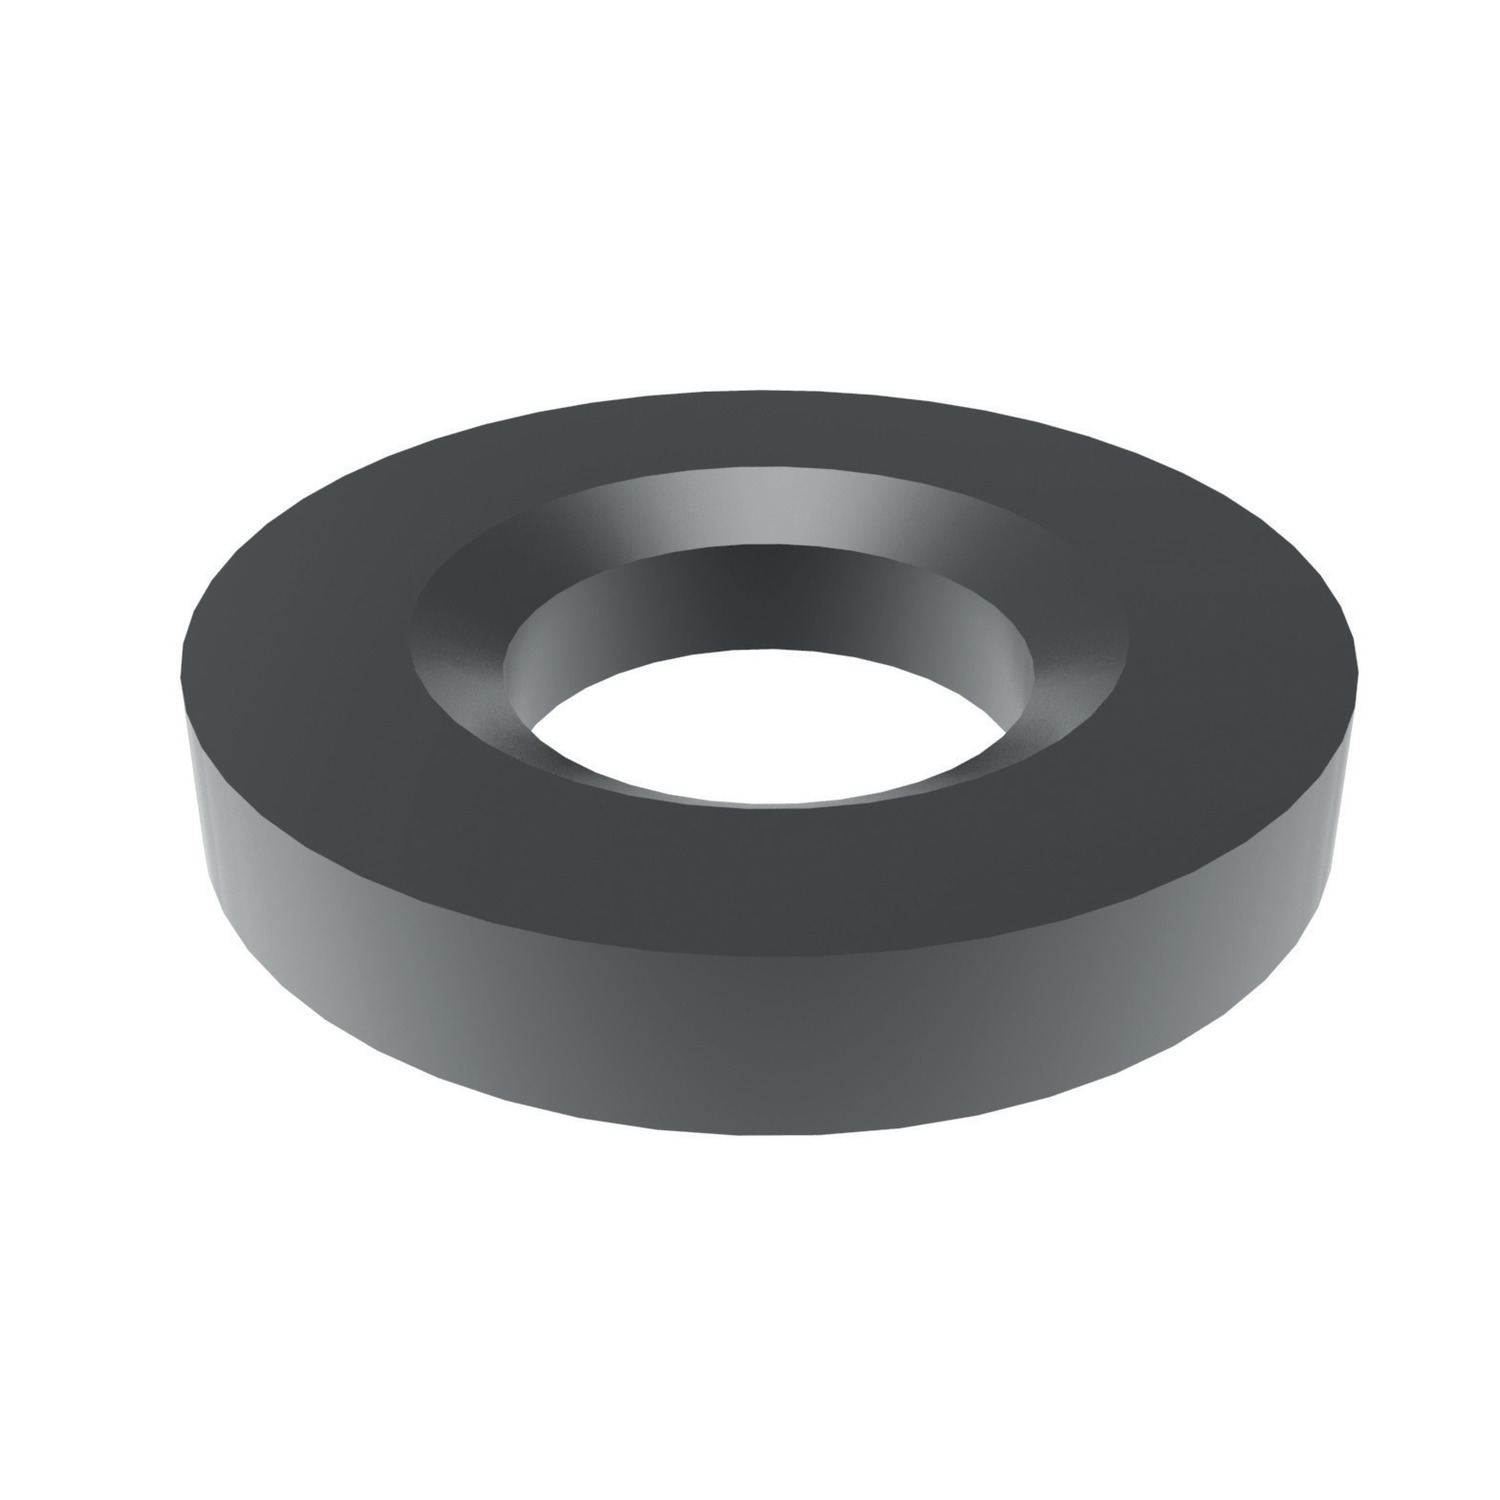 Dished Washers Type G dished washers are ideal to use on slotted clamps due to their large diameter and thickness. Made in tempered steel to DIN 6319G.